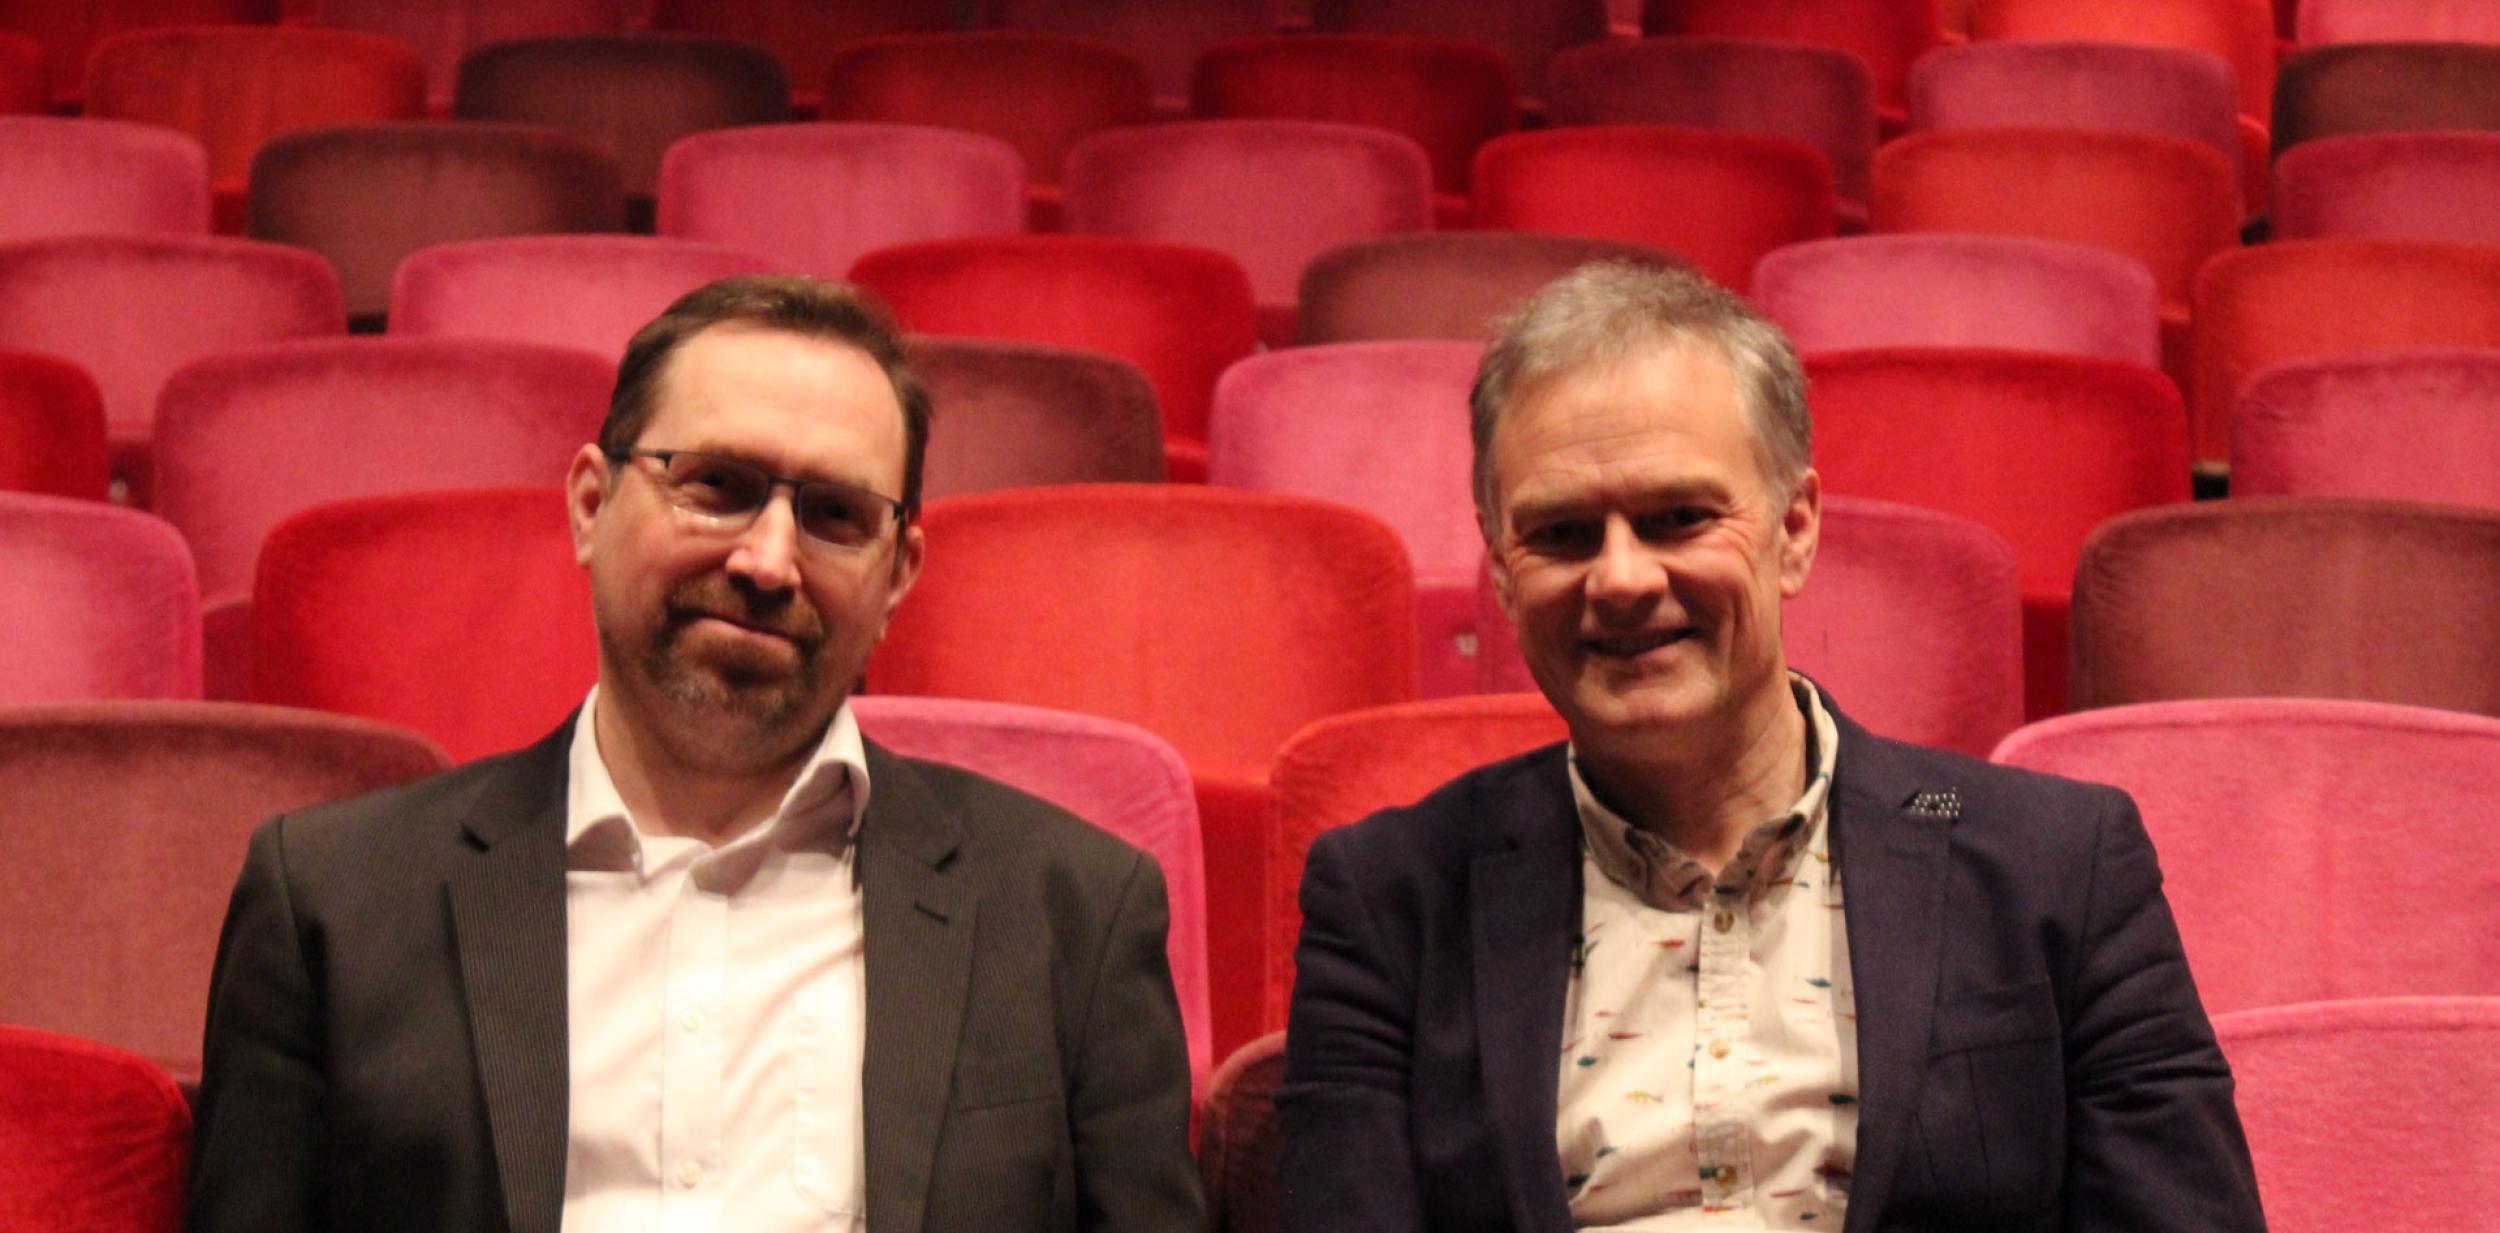 Winchester University's Professor Alec Charles sat with Play to the Crowd CEO Deryck Newland in Theatre Royal Winchester's auditorium.